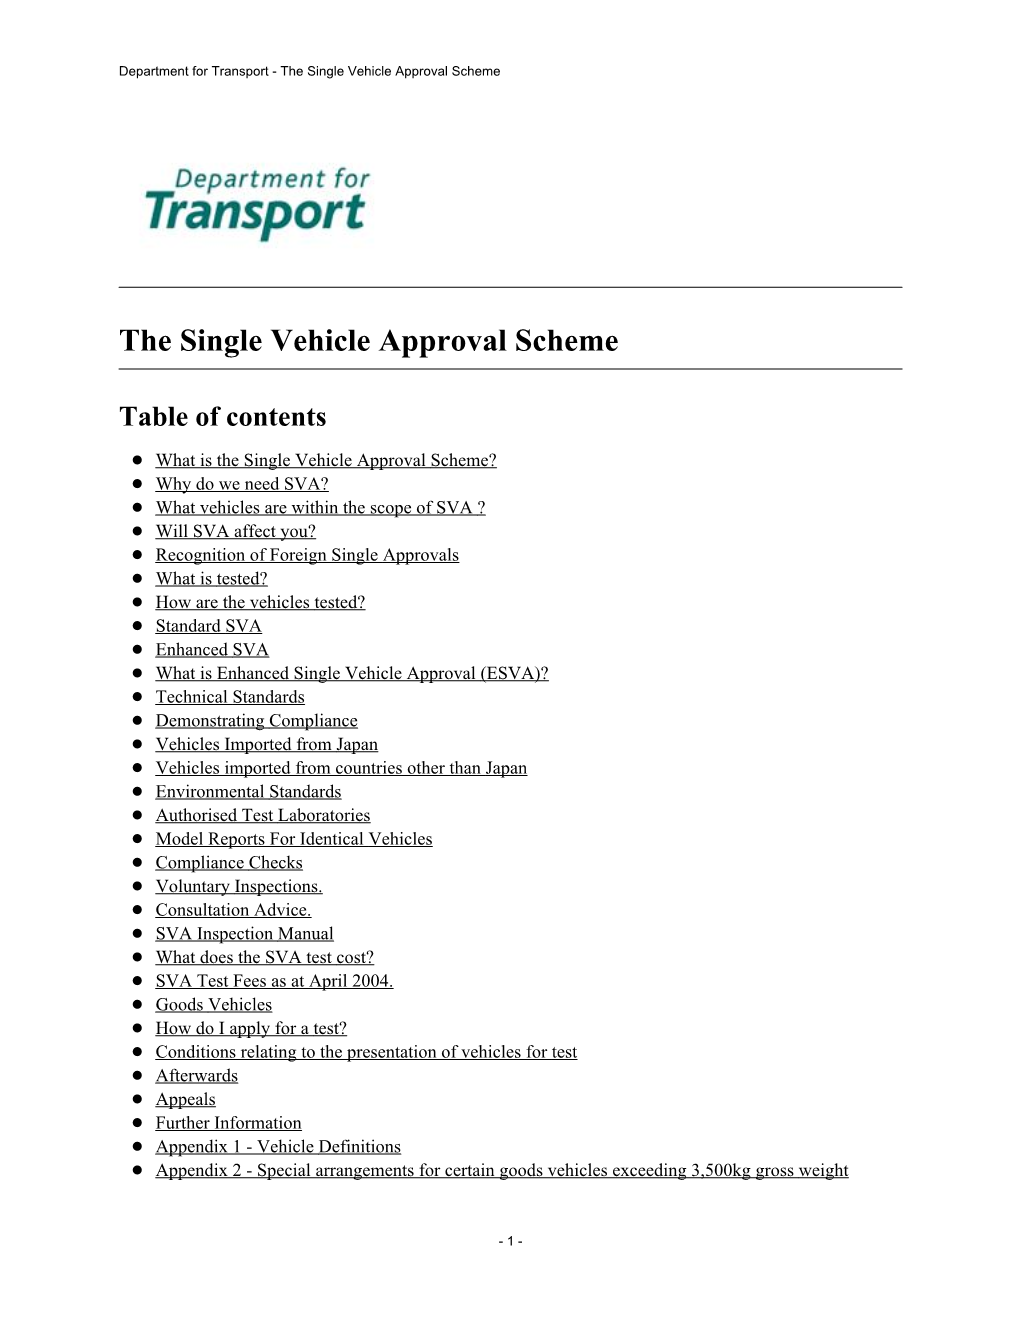 Department for Transport - the Single Vehicle Approval Scheme